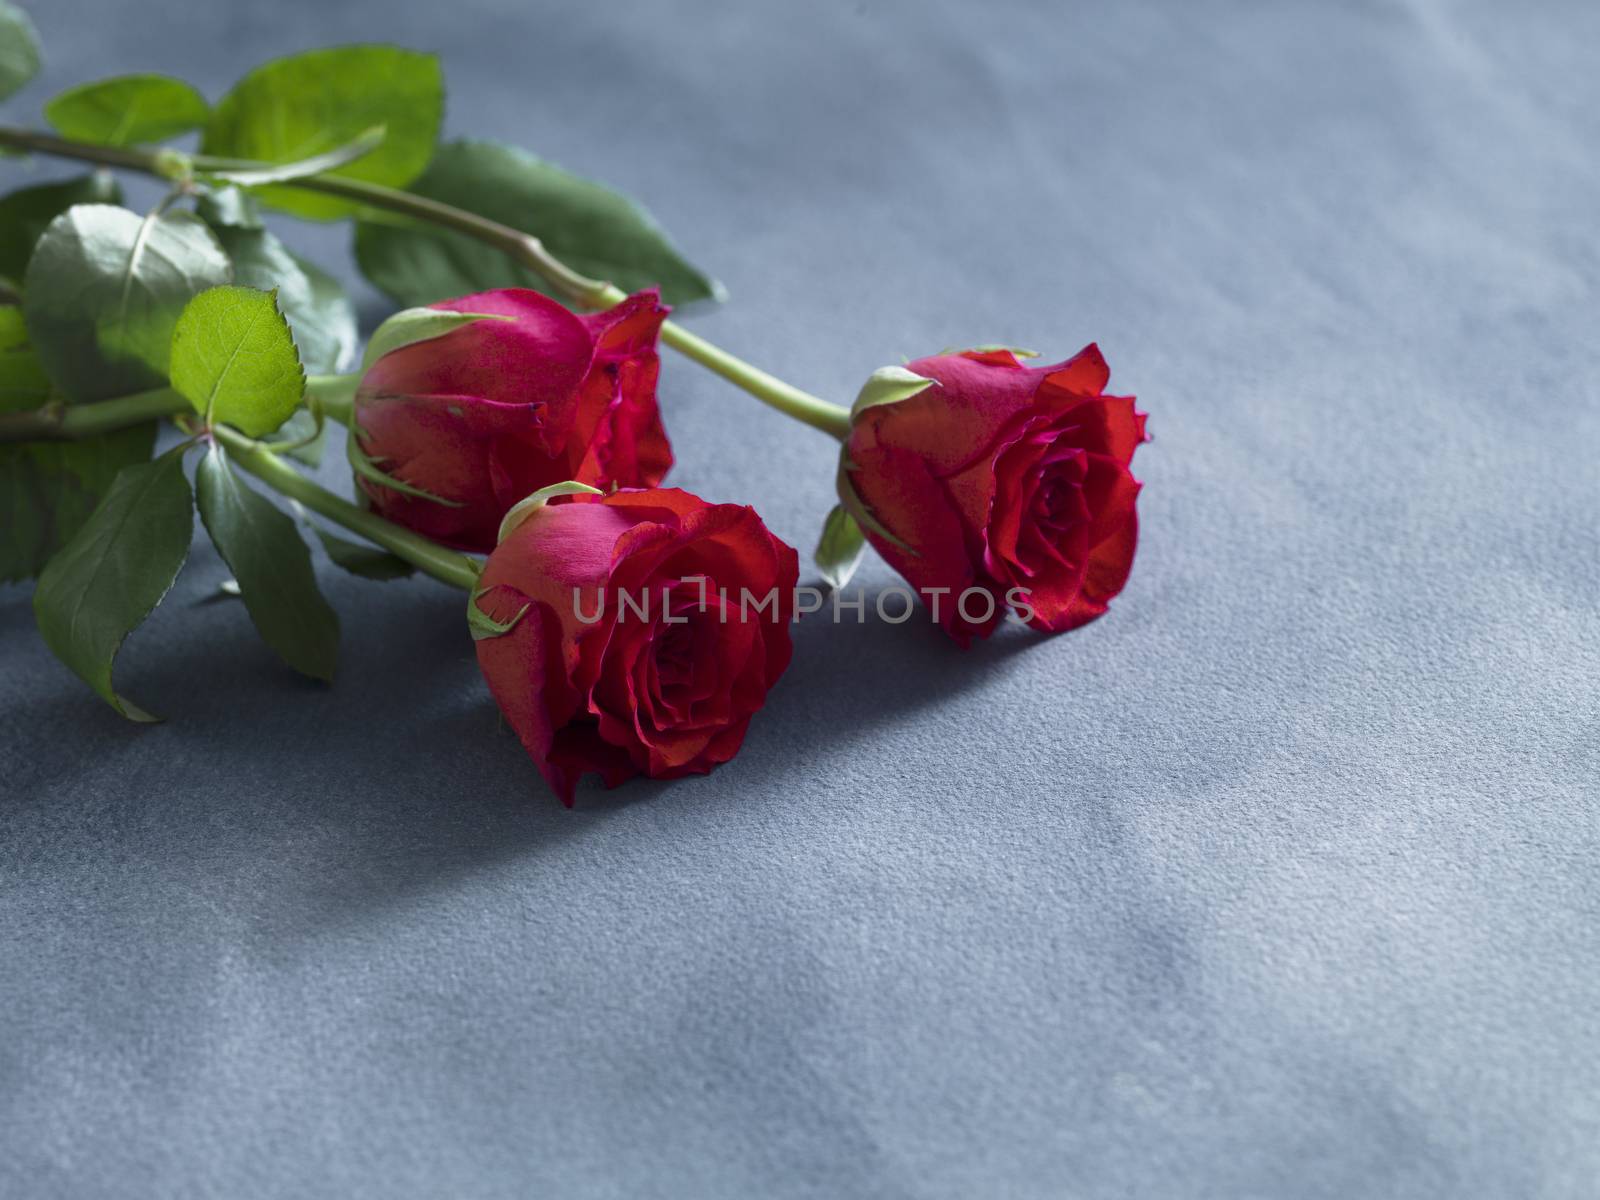 wedding concept with fresh red roses on blue slate background by janssenkruseproductions